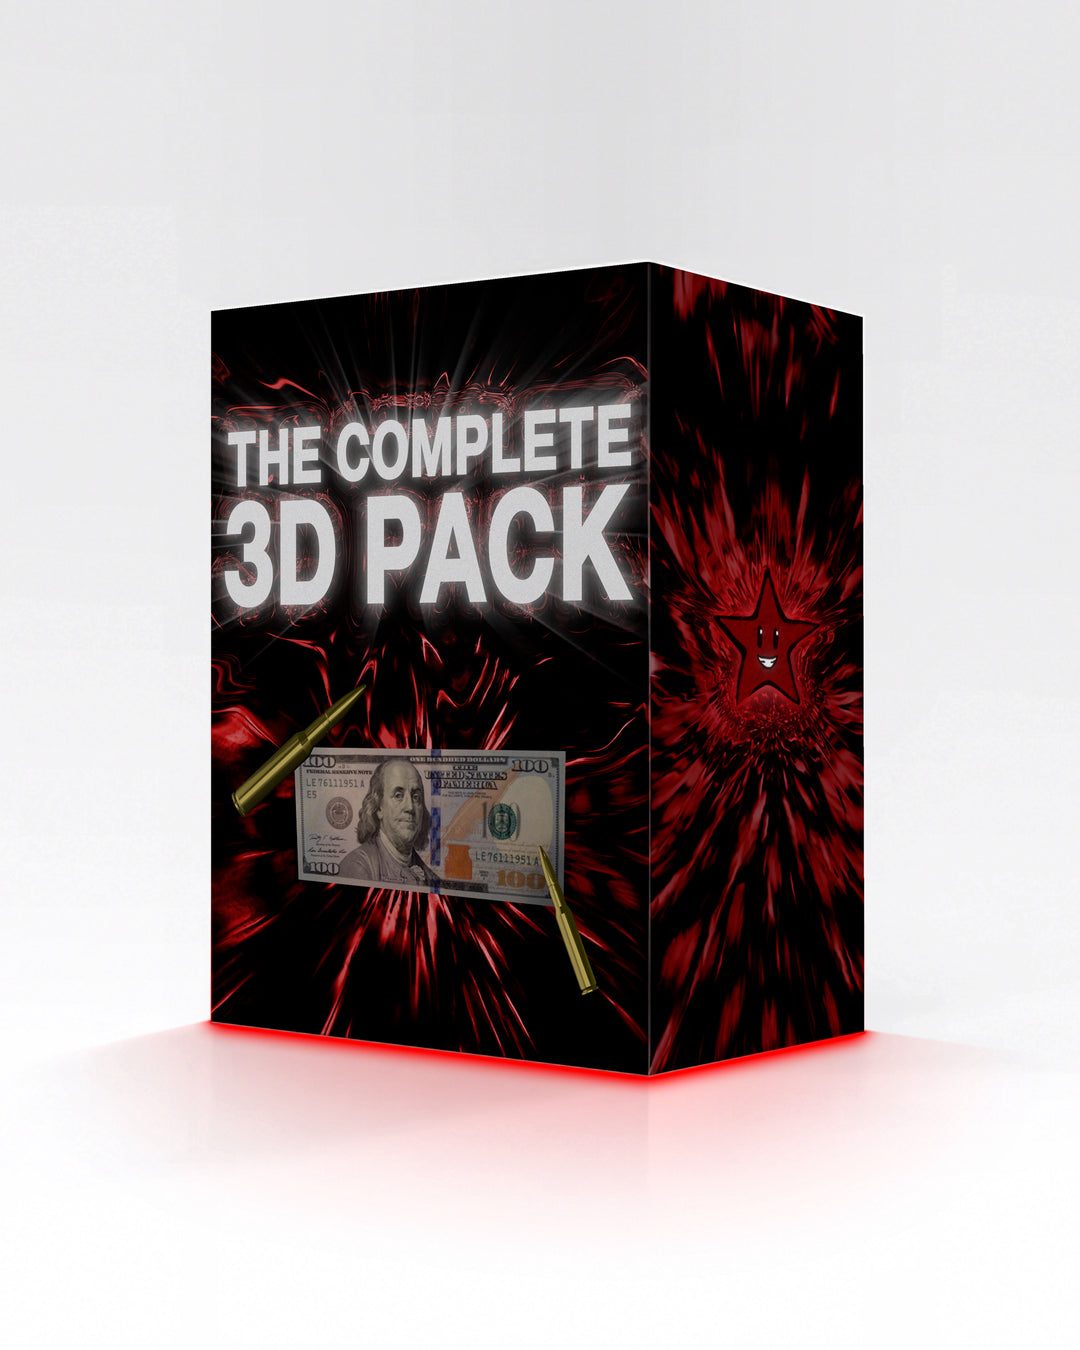 The Complete 3D Pack